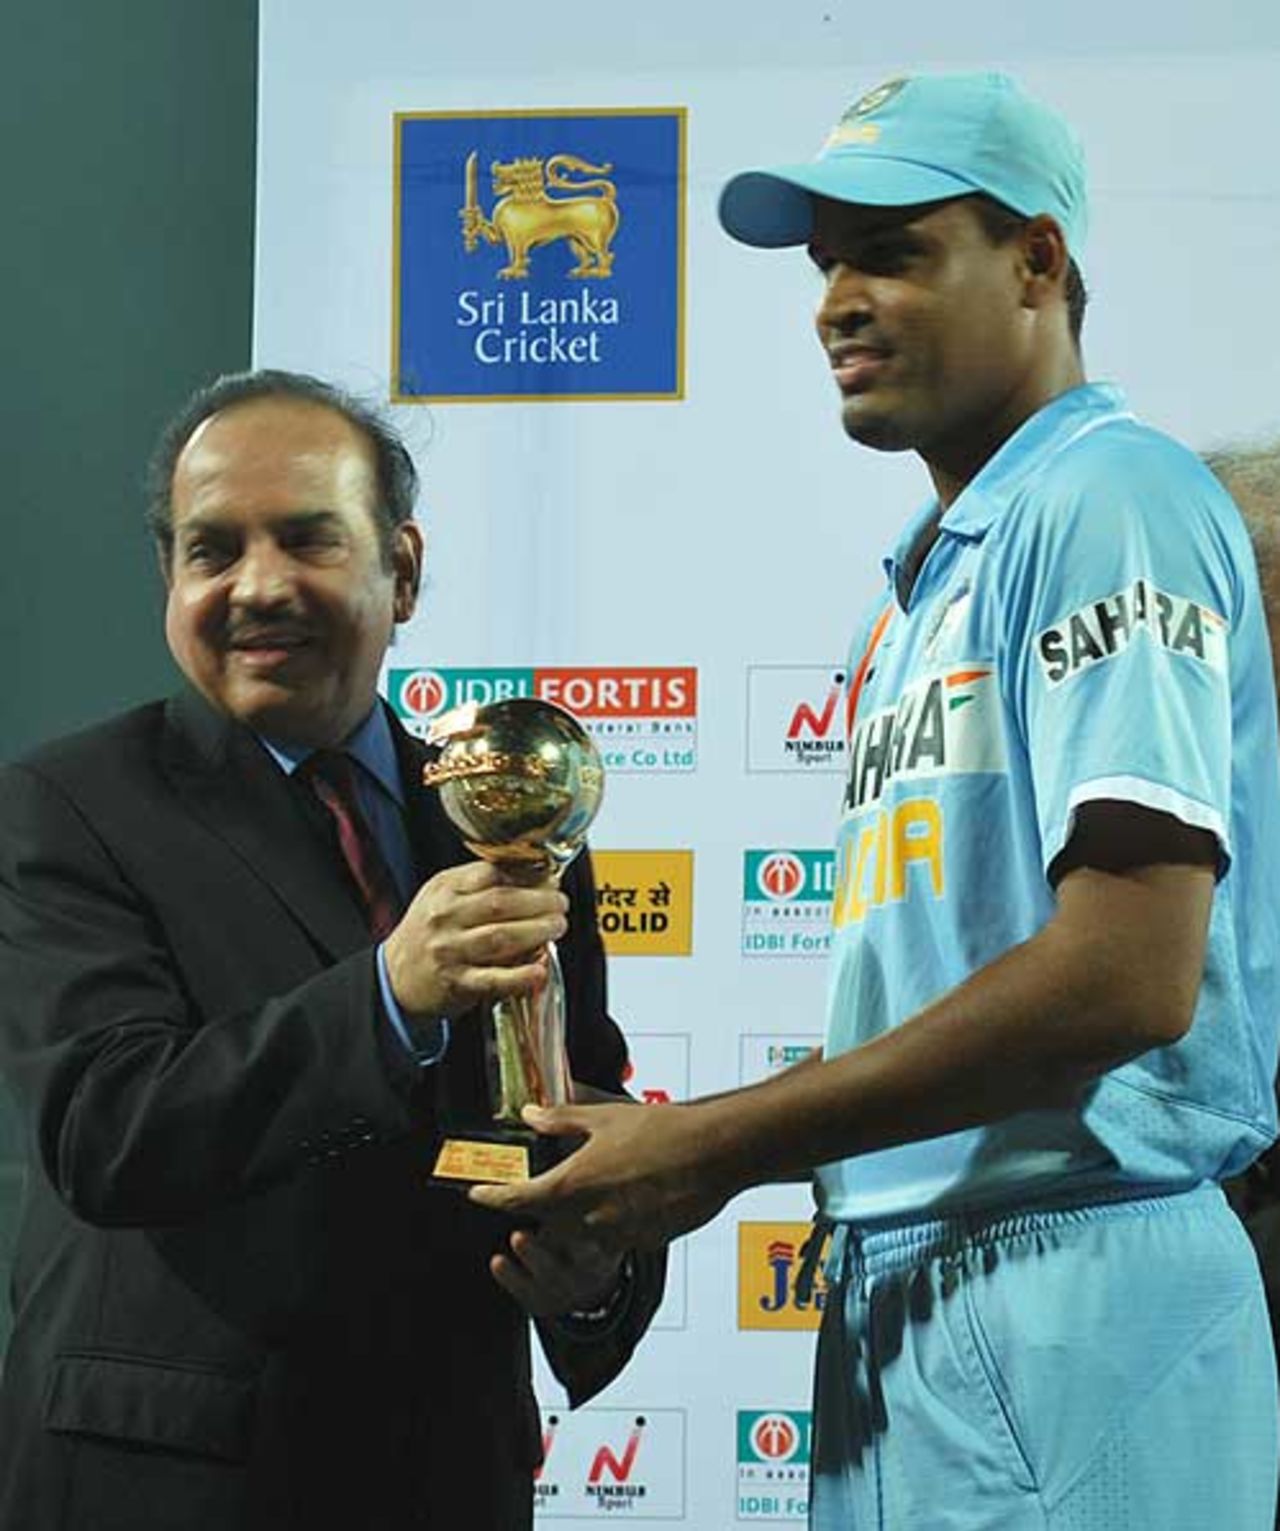 Yusuf Pathan was Man of the Match, Sri Lanka v India, Only T20 International, Colombo, February 10, 2009